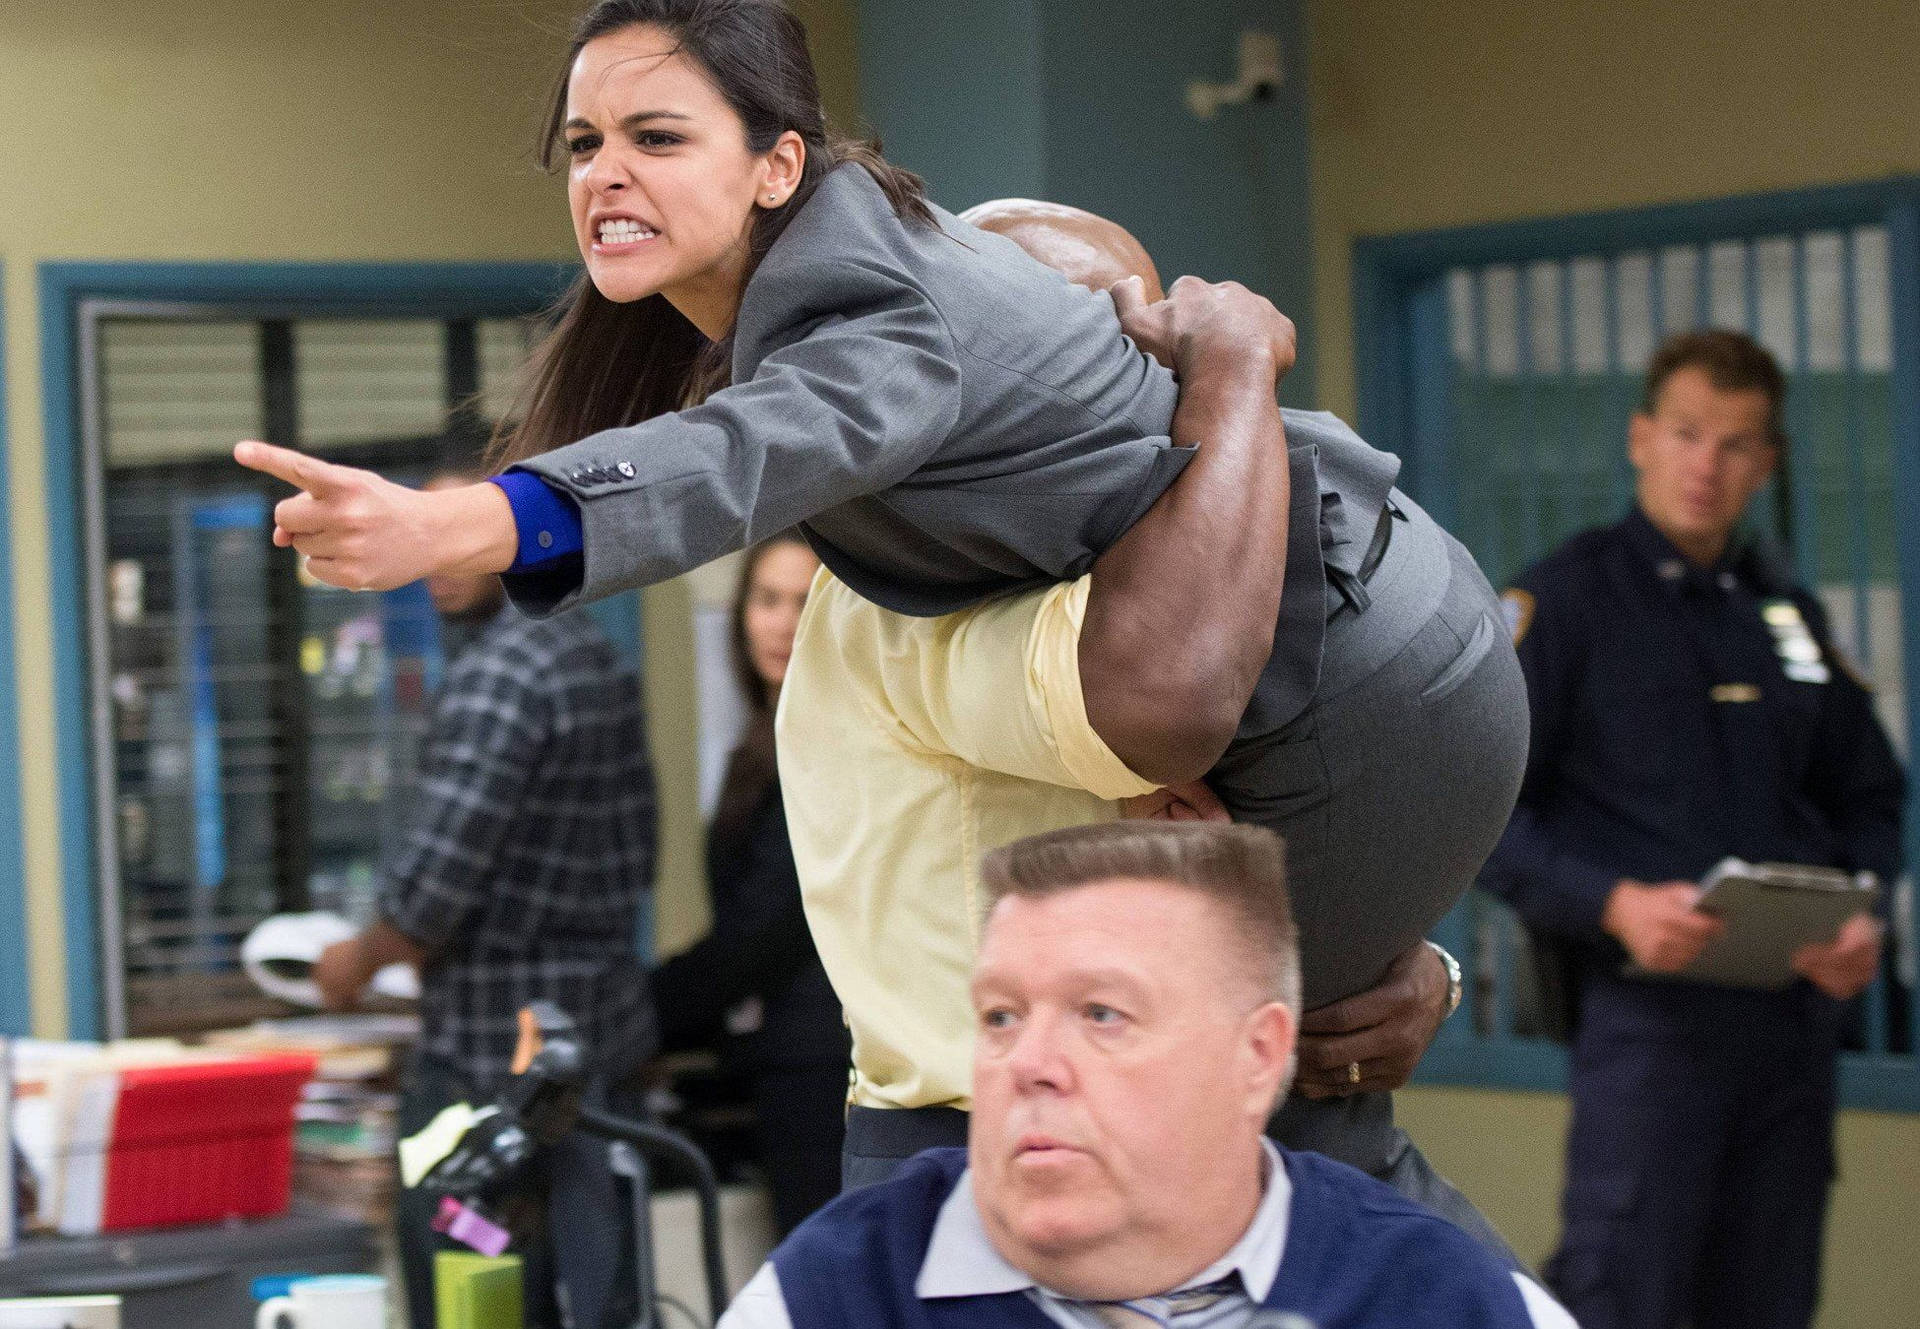 Amy Santiago From Brooklyn Nine Nine Looking Angry. Background